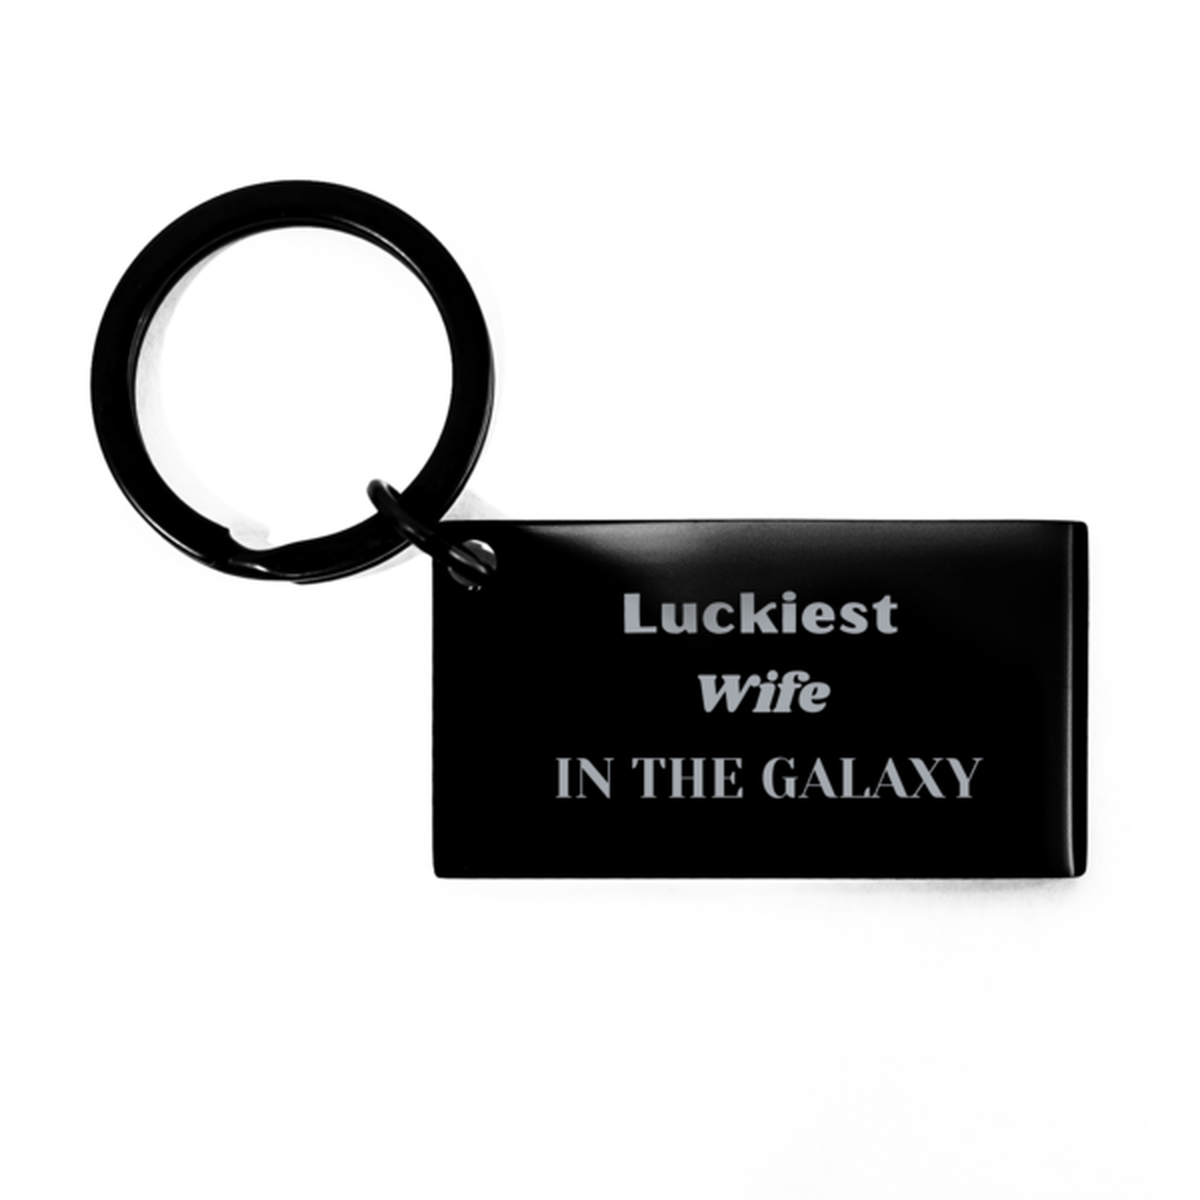 Luckiest Wife in the Galaxy, To My Wife Engraved Gifts, Christmas Wife Keychain Gifts, X-mas Birthday Unique Gifts For Wife Men Women